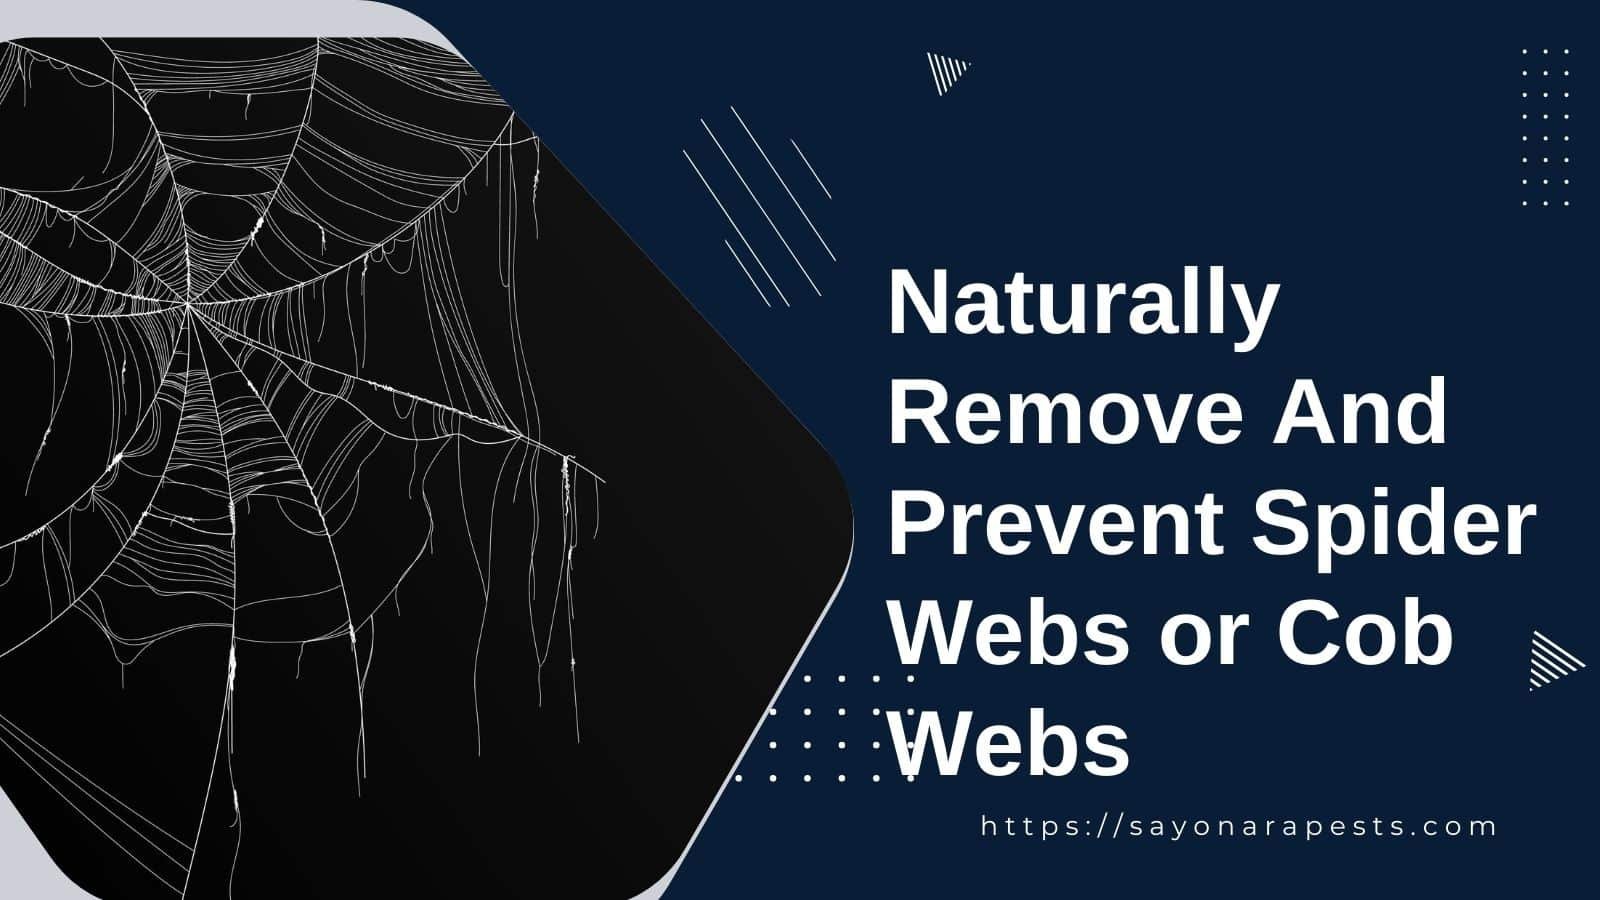 How To Naturally Remove And Prevent Spider Webs Or Cob Webs Sayonara Pests 6450